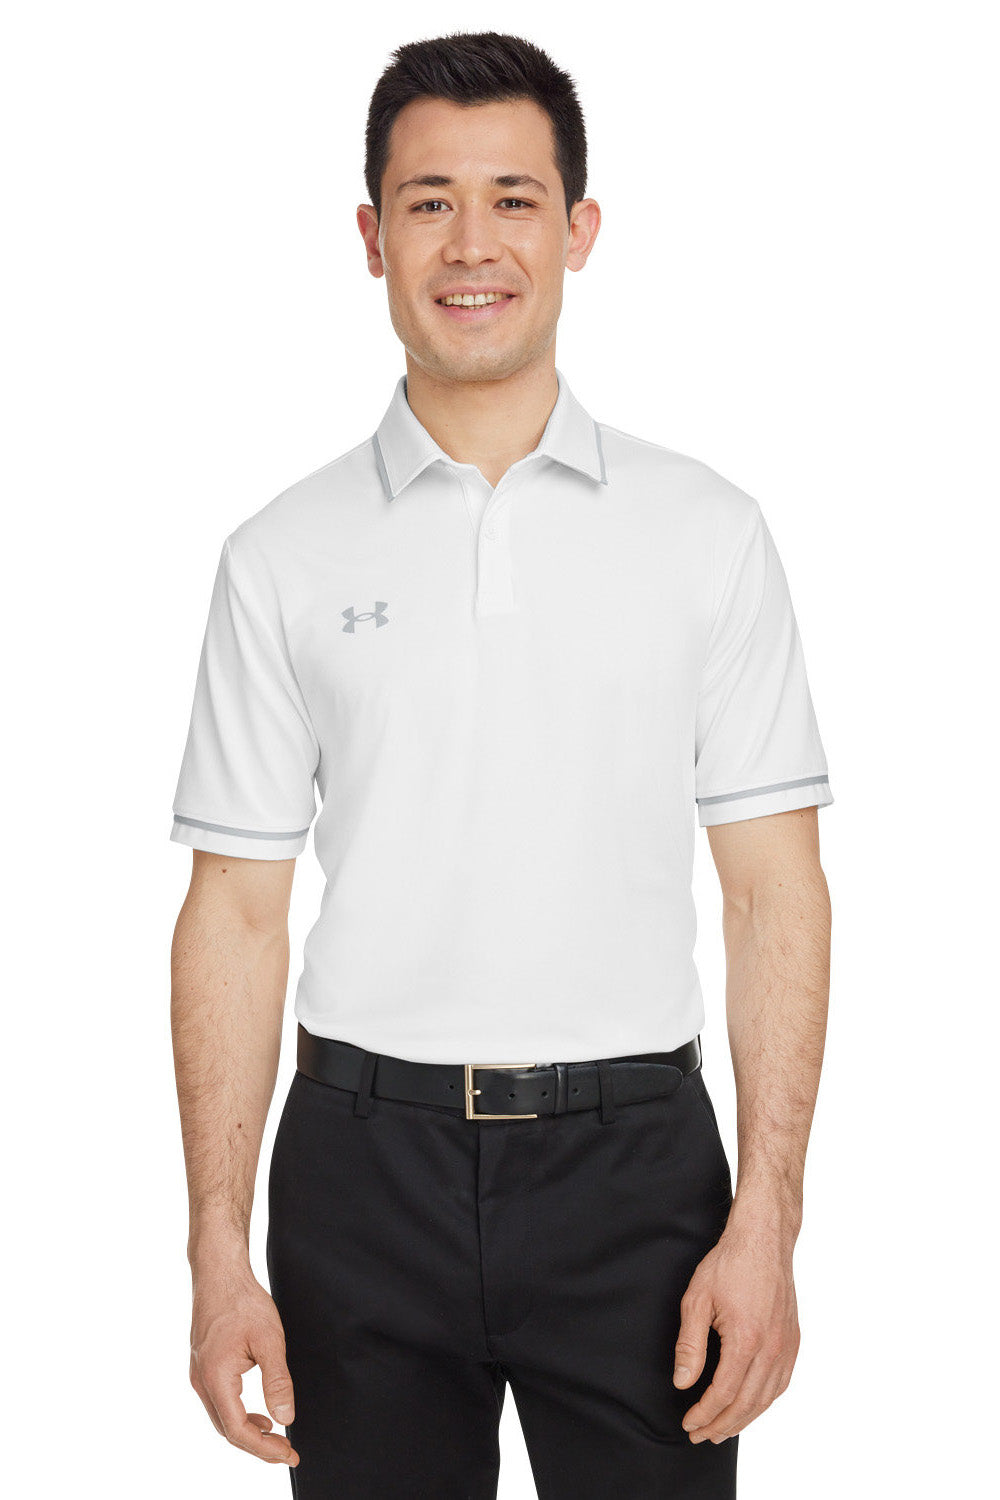 Under Armour 1376904 Mens Teams Performance Moisture Wicking Short Sleeve Polo Shirt White Model Front